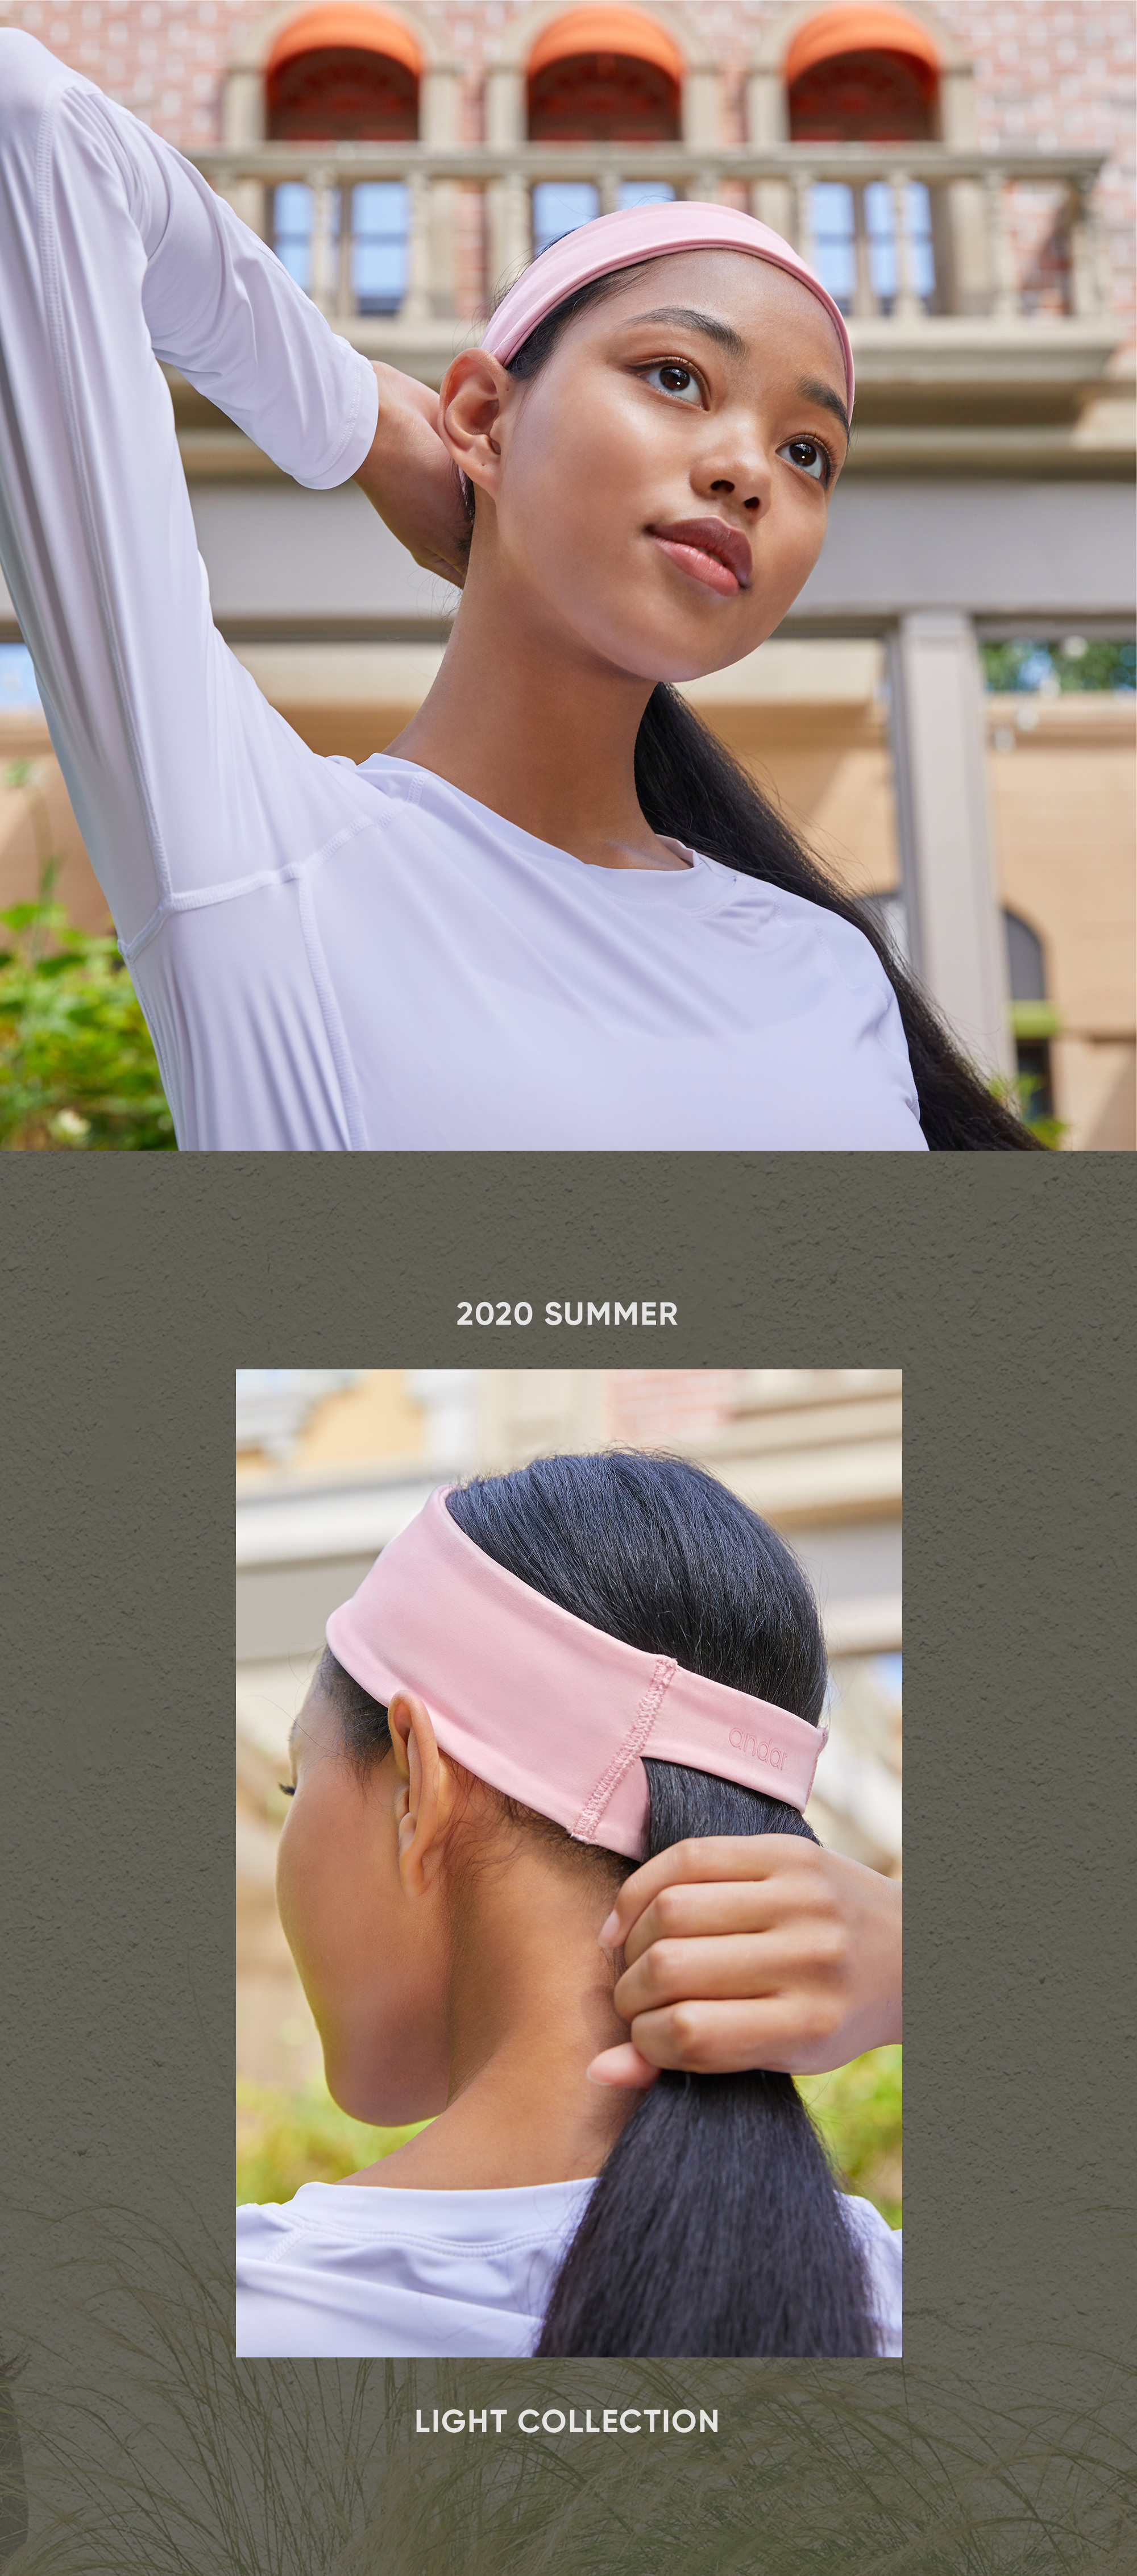 2020 SUMMER LIGHT COLLECTION